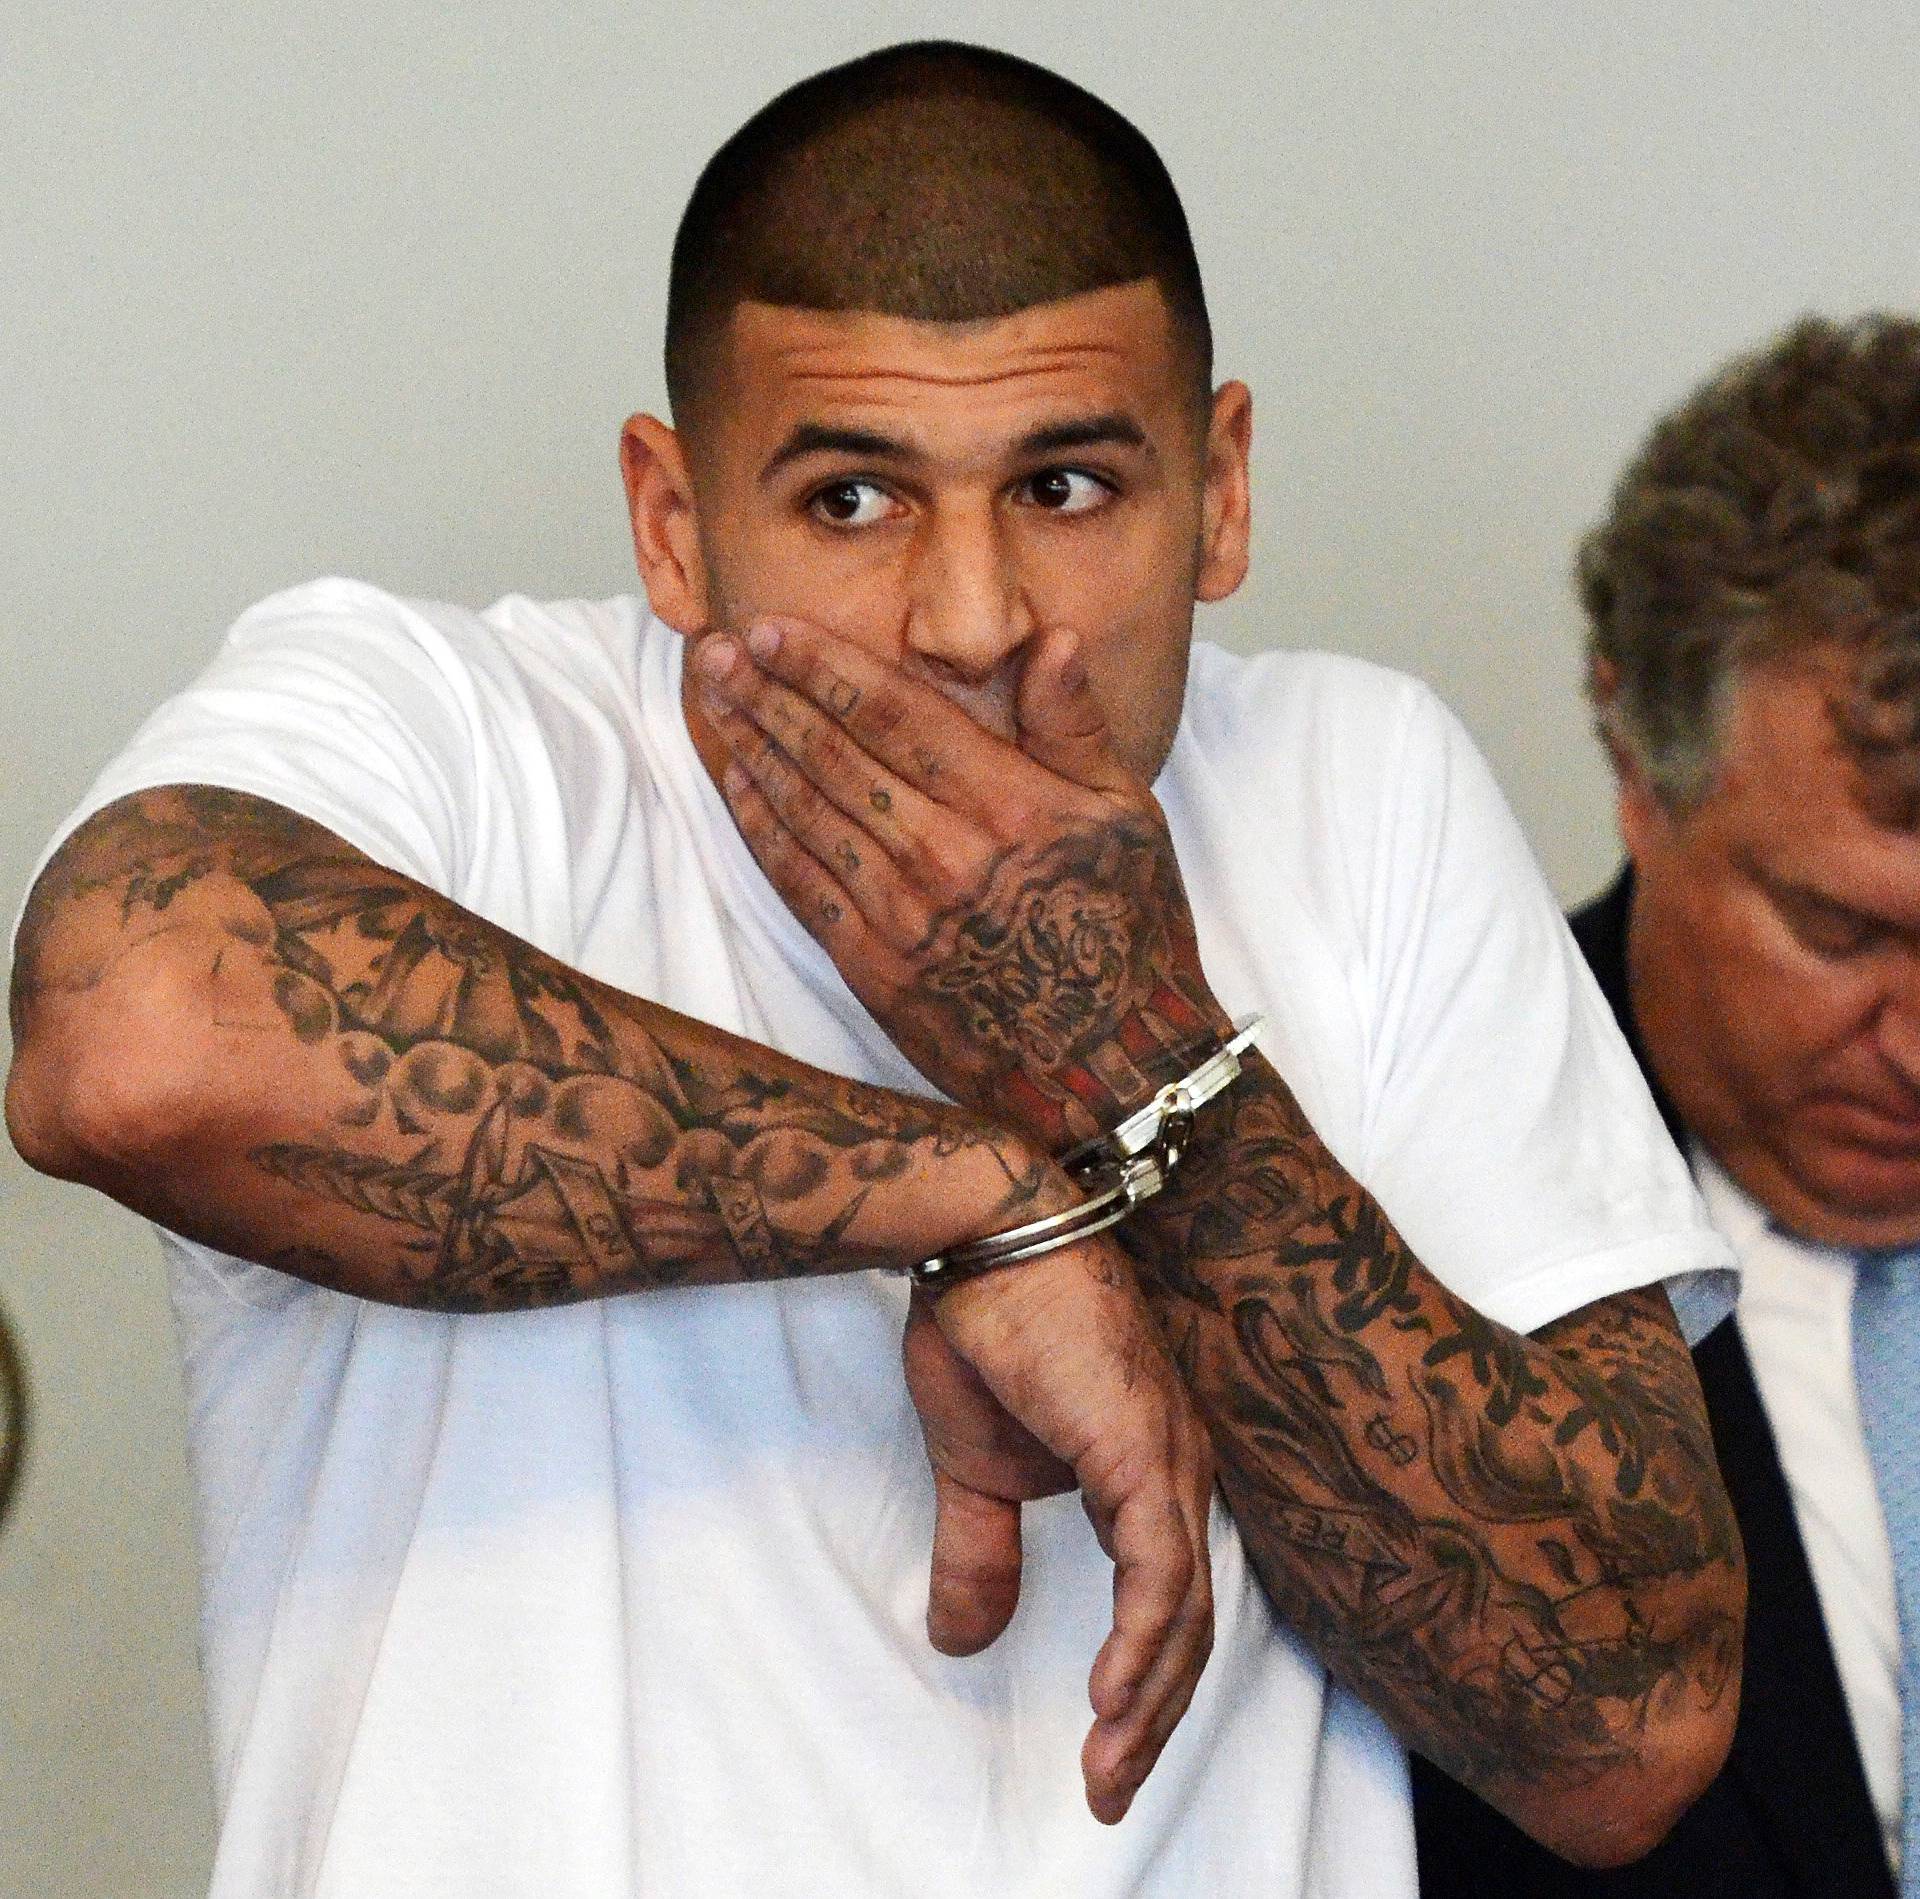 FILE PHOTO - New England Patriots tight end Aaron Hernandez is arraigned in court in Attleborough Massachusetts